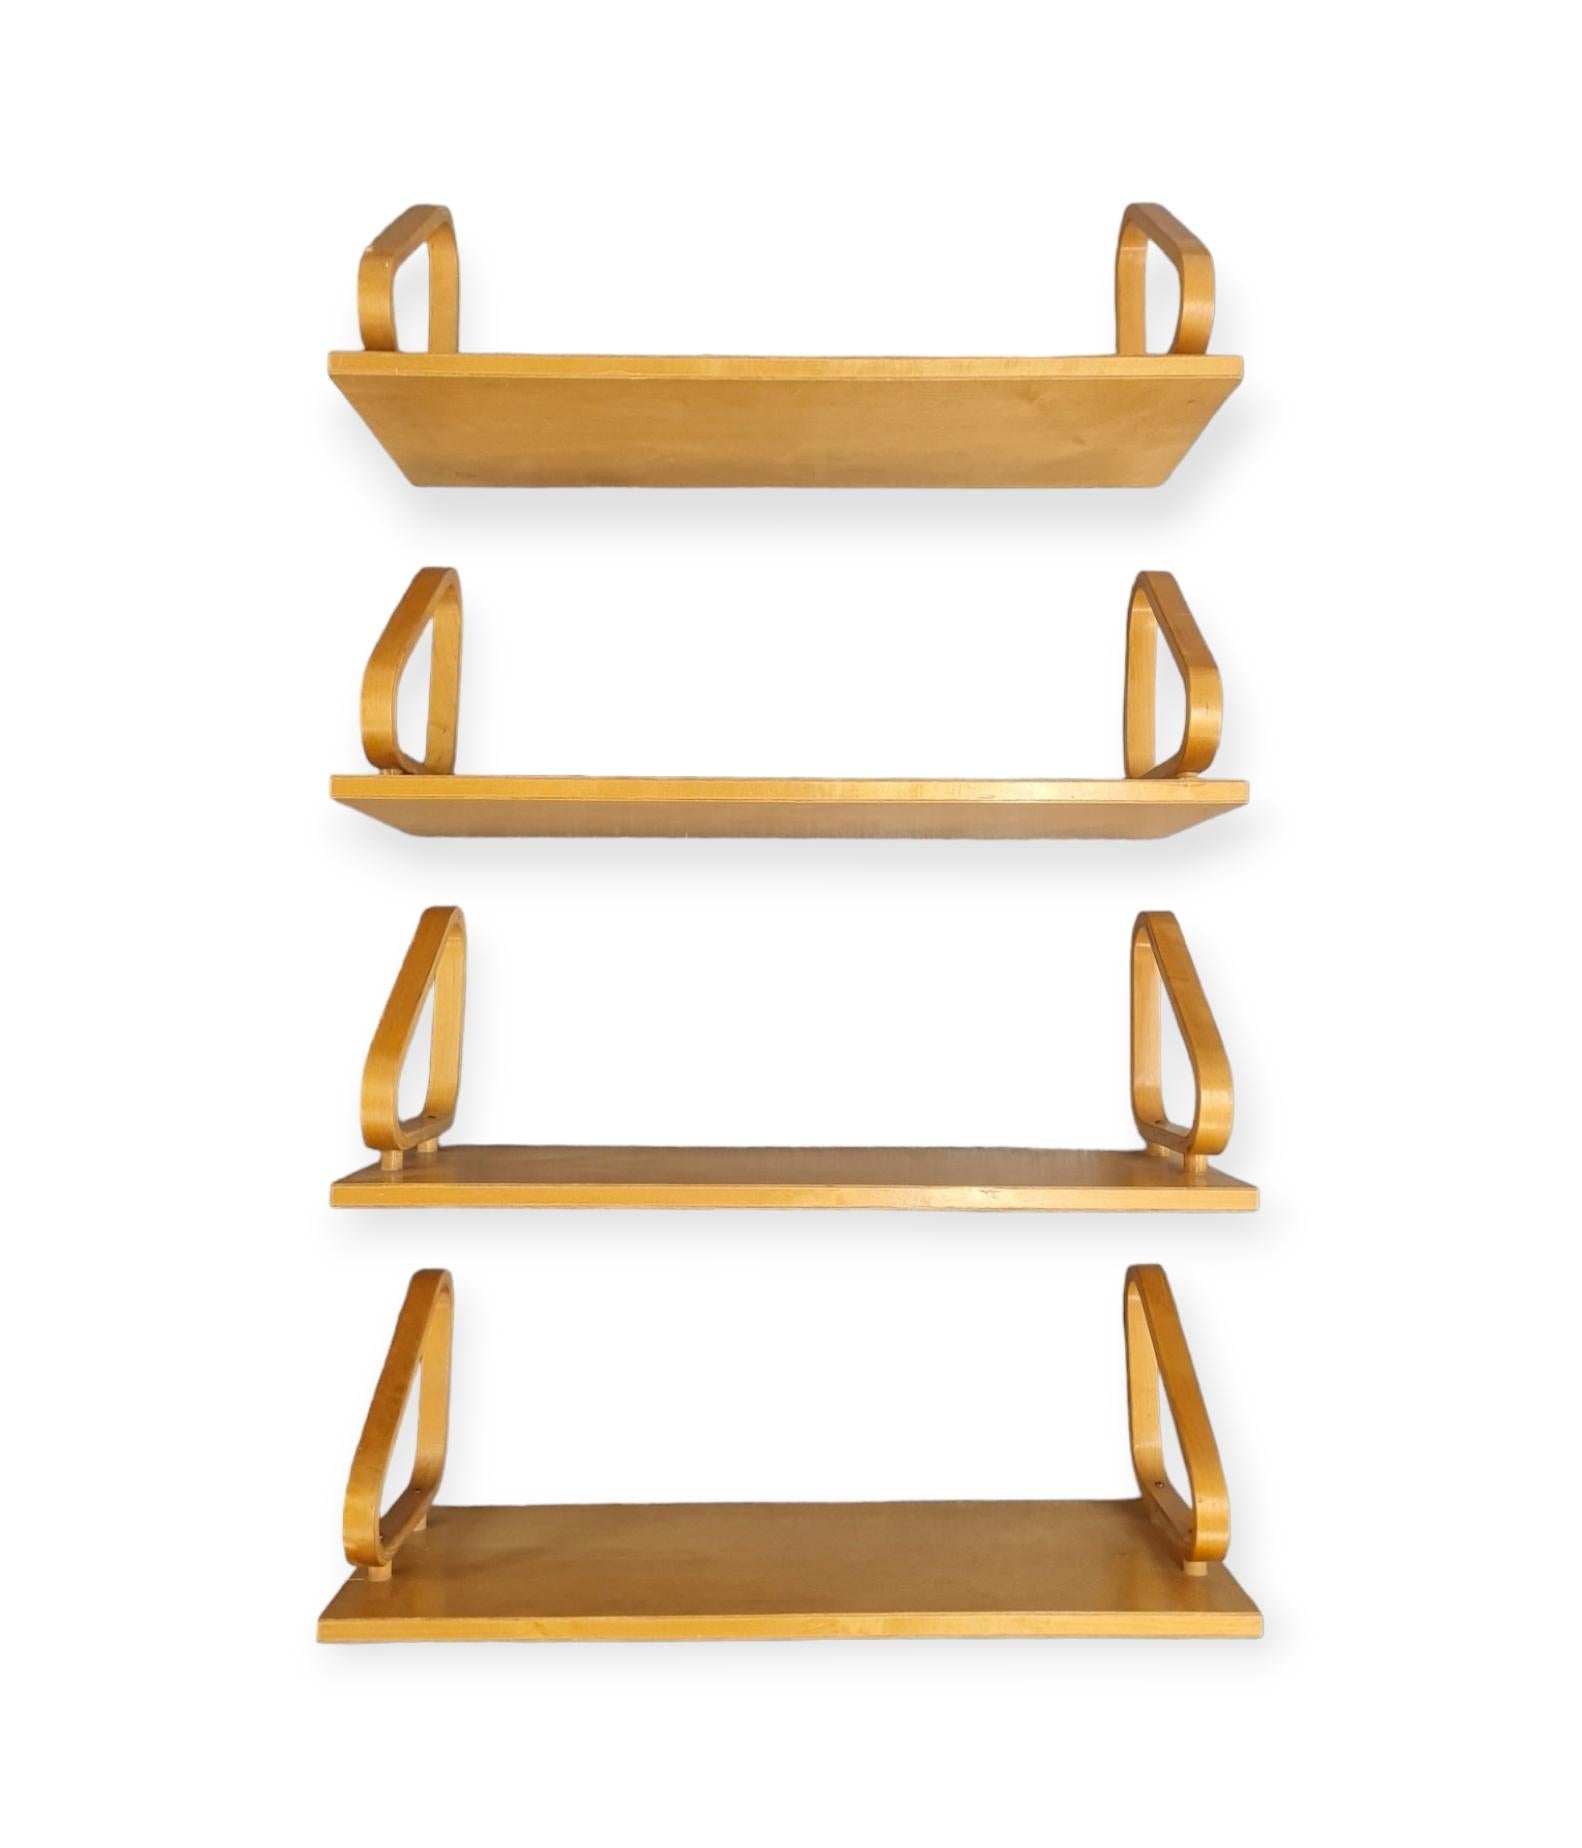 Rare Set of 4 Alvar Aalto Wall Shelves Model 112 with Pegs, 1930s.  For Sale 4